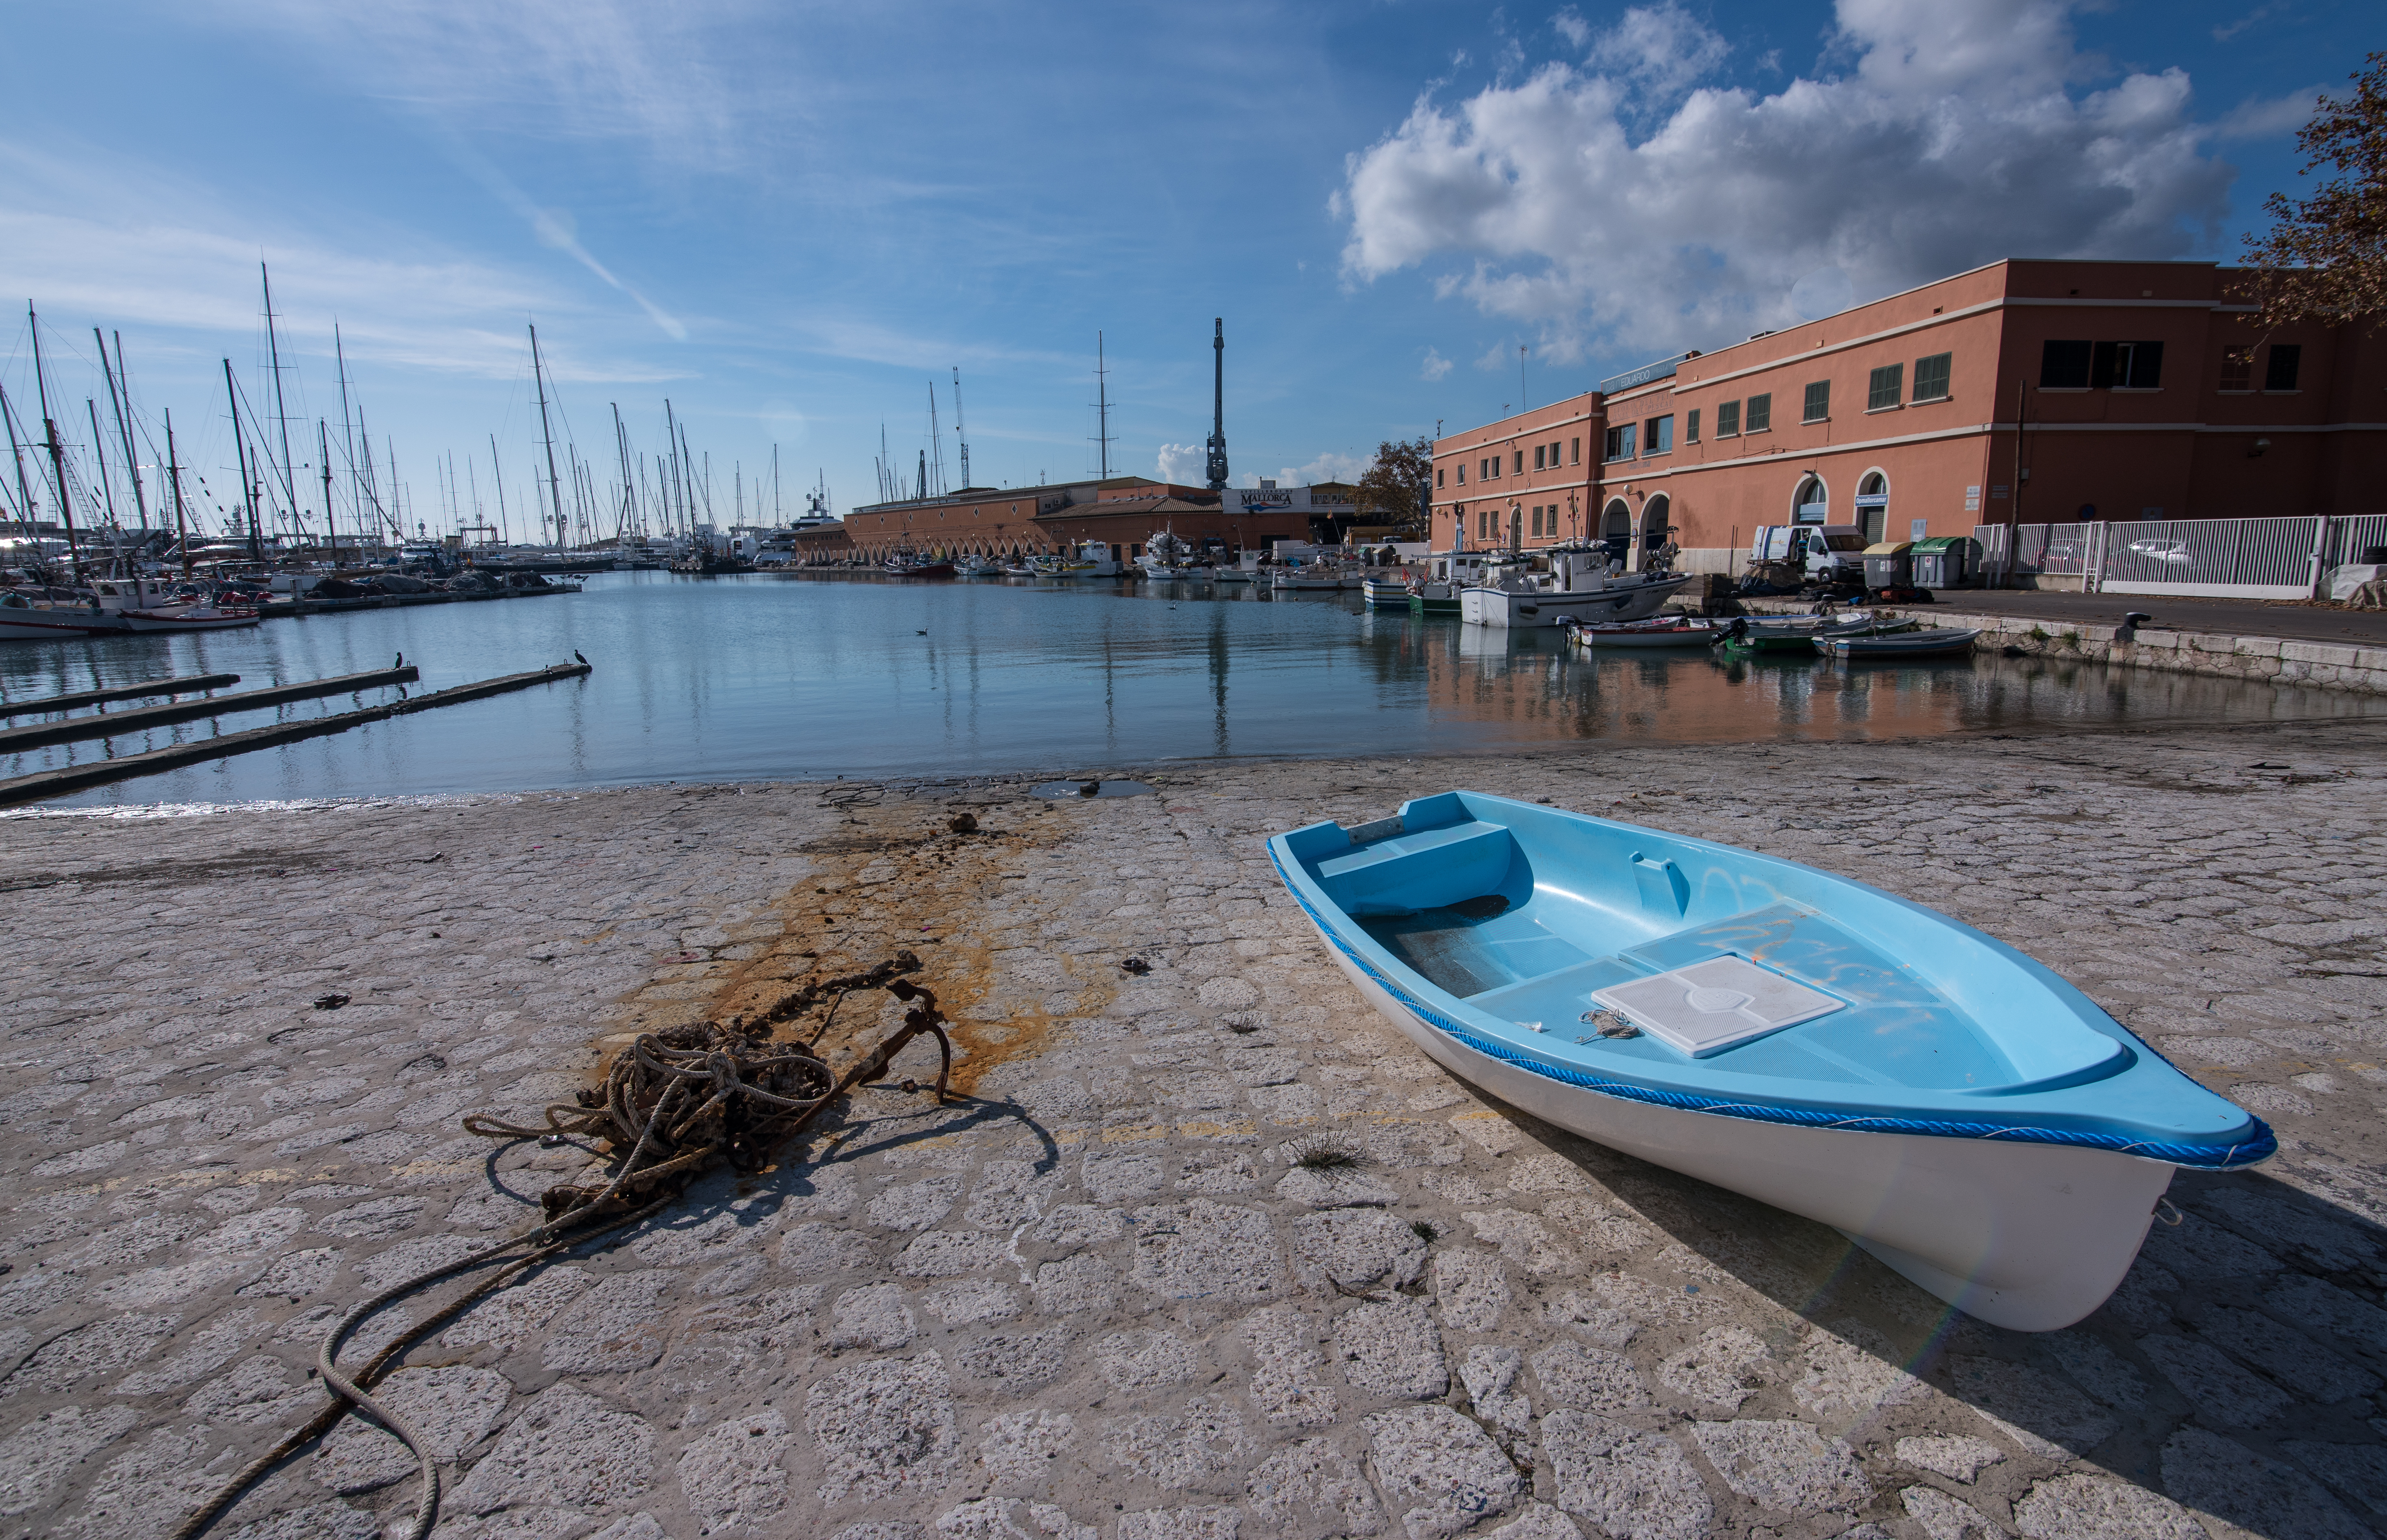 The effects of climate change could leave inoperative some docks or piers of the ports of general interest of the Balearic Islands